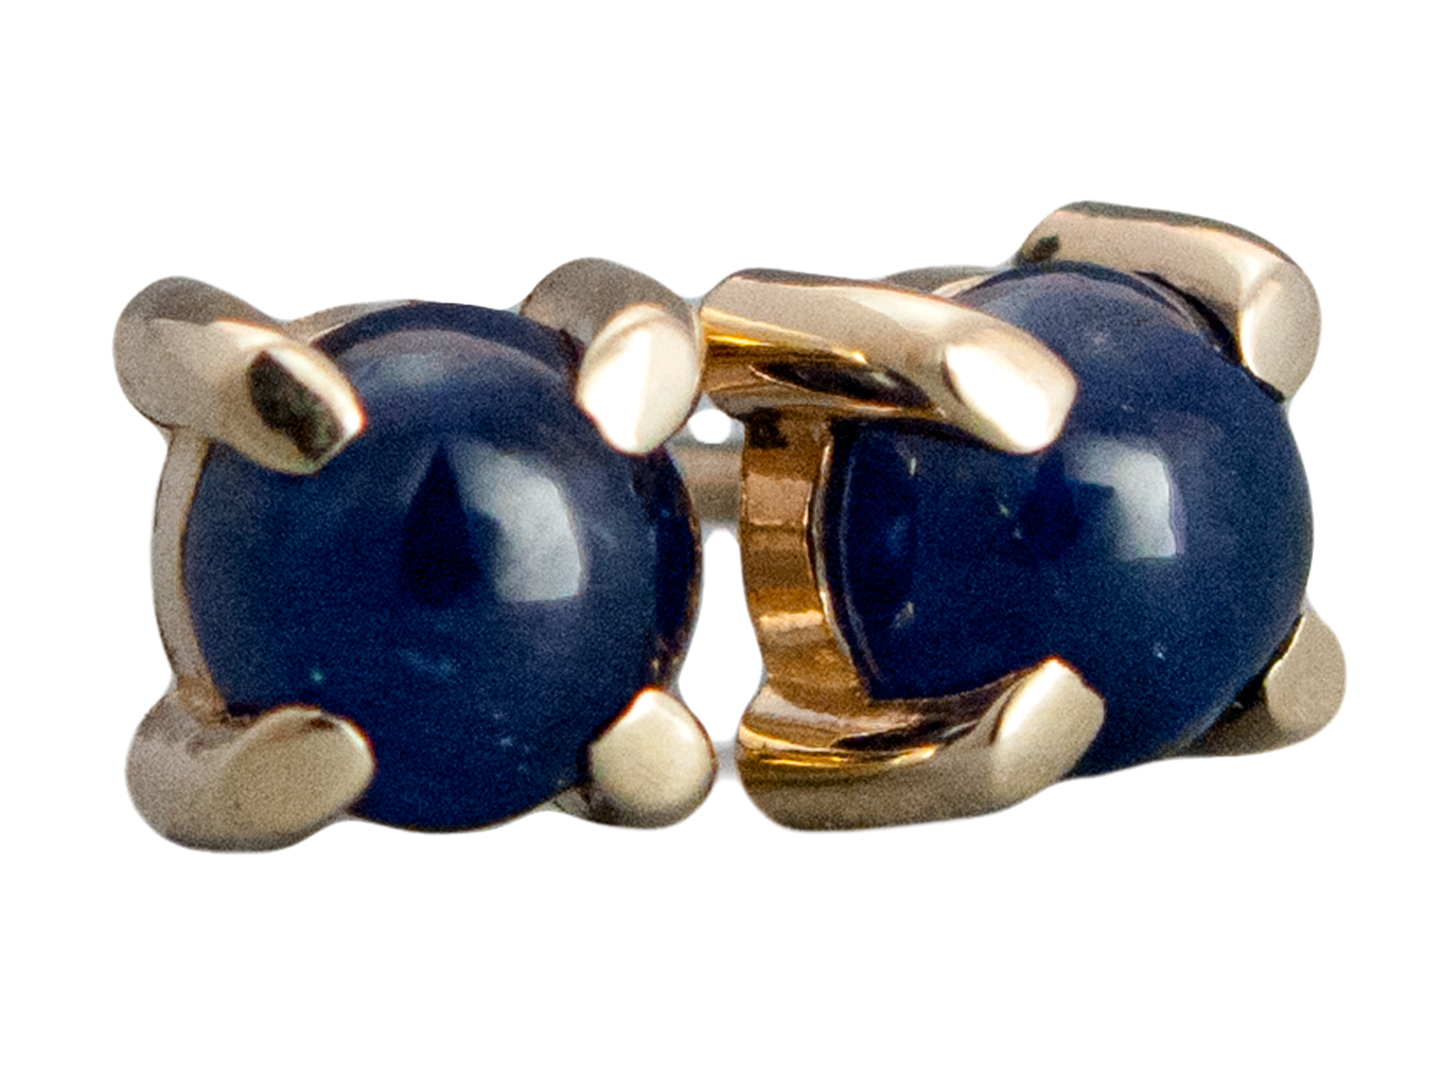 Blue Sapphire Cabochon 4 Prong Studs in 14k Gold - 4mm Round cabochon earrings in 14k rose, yellow or white gold